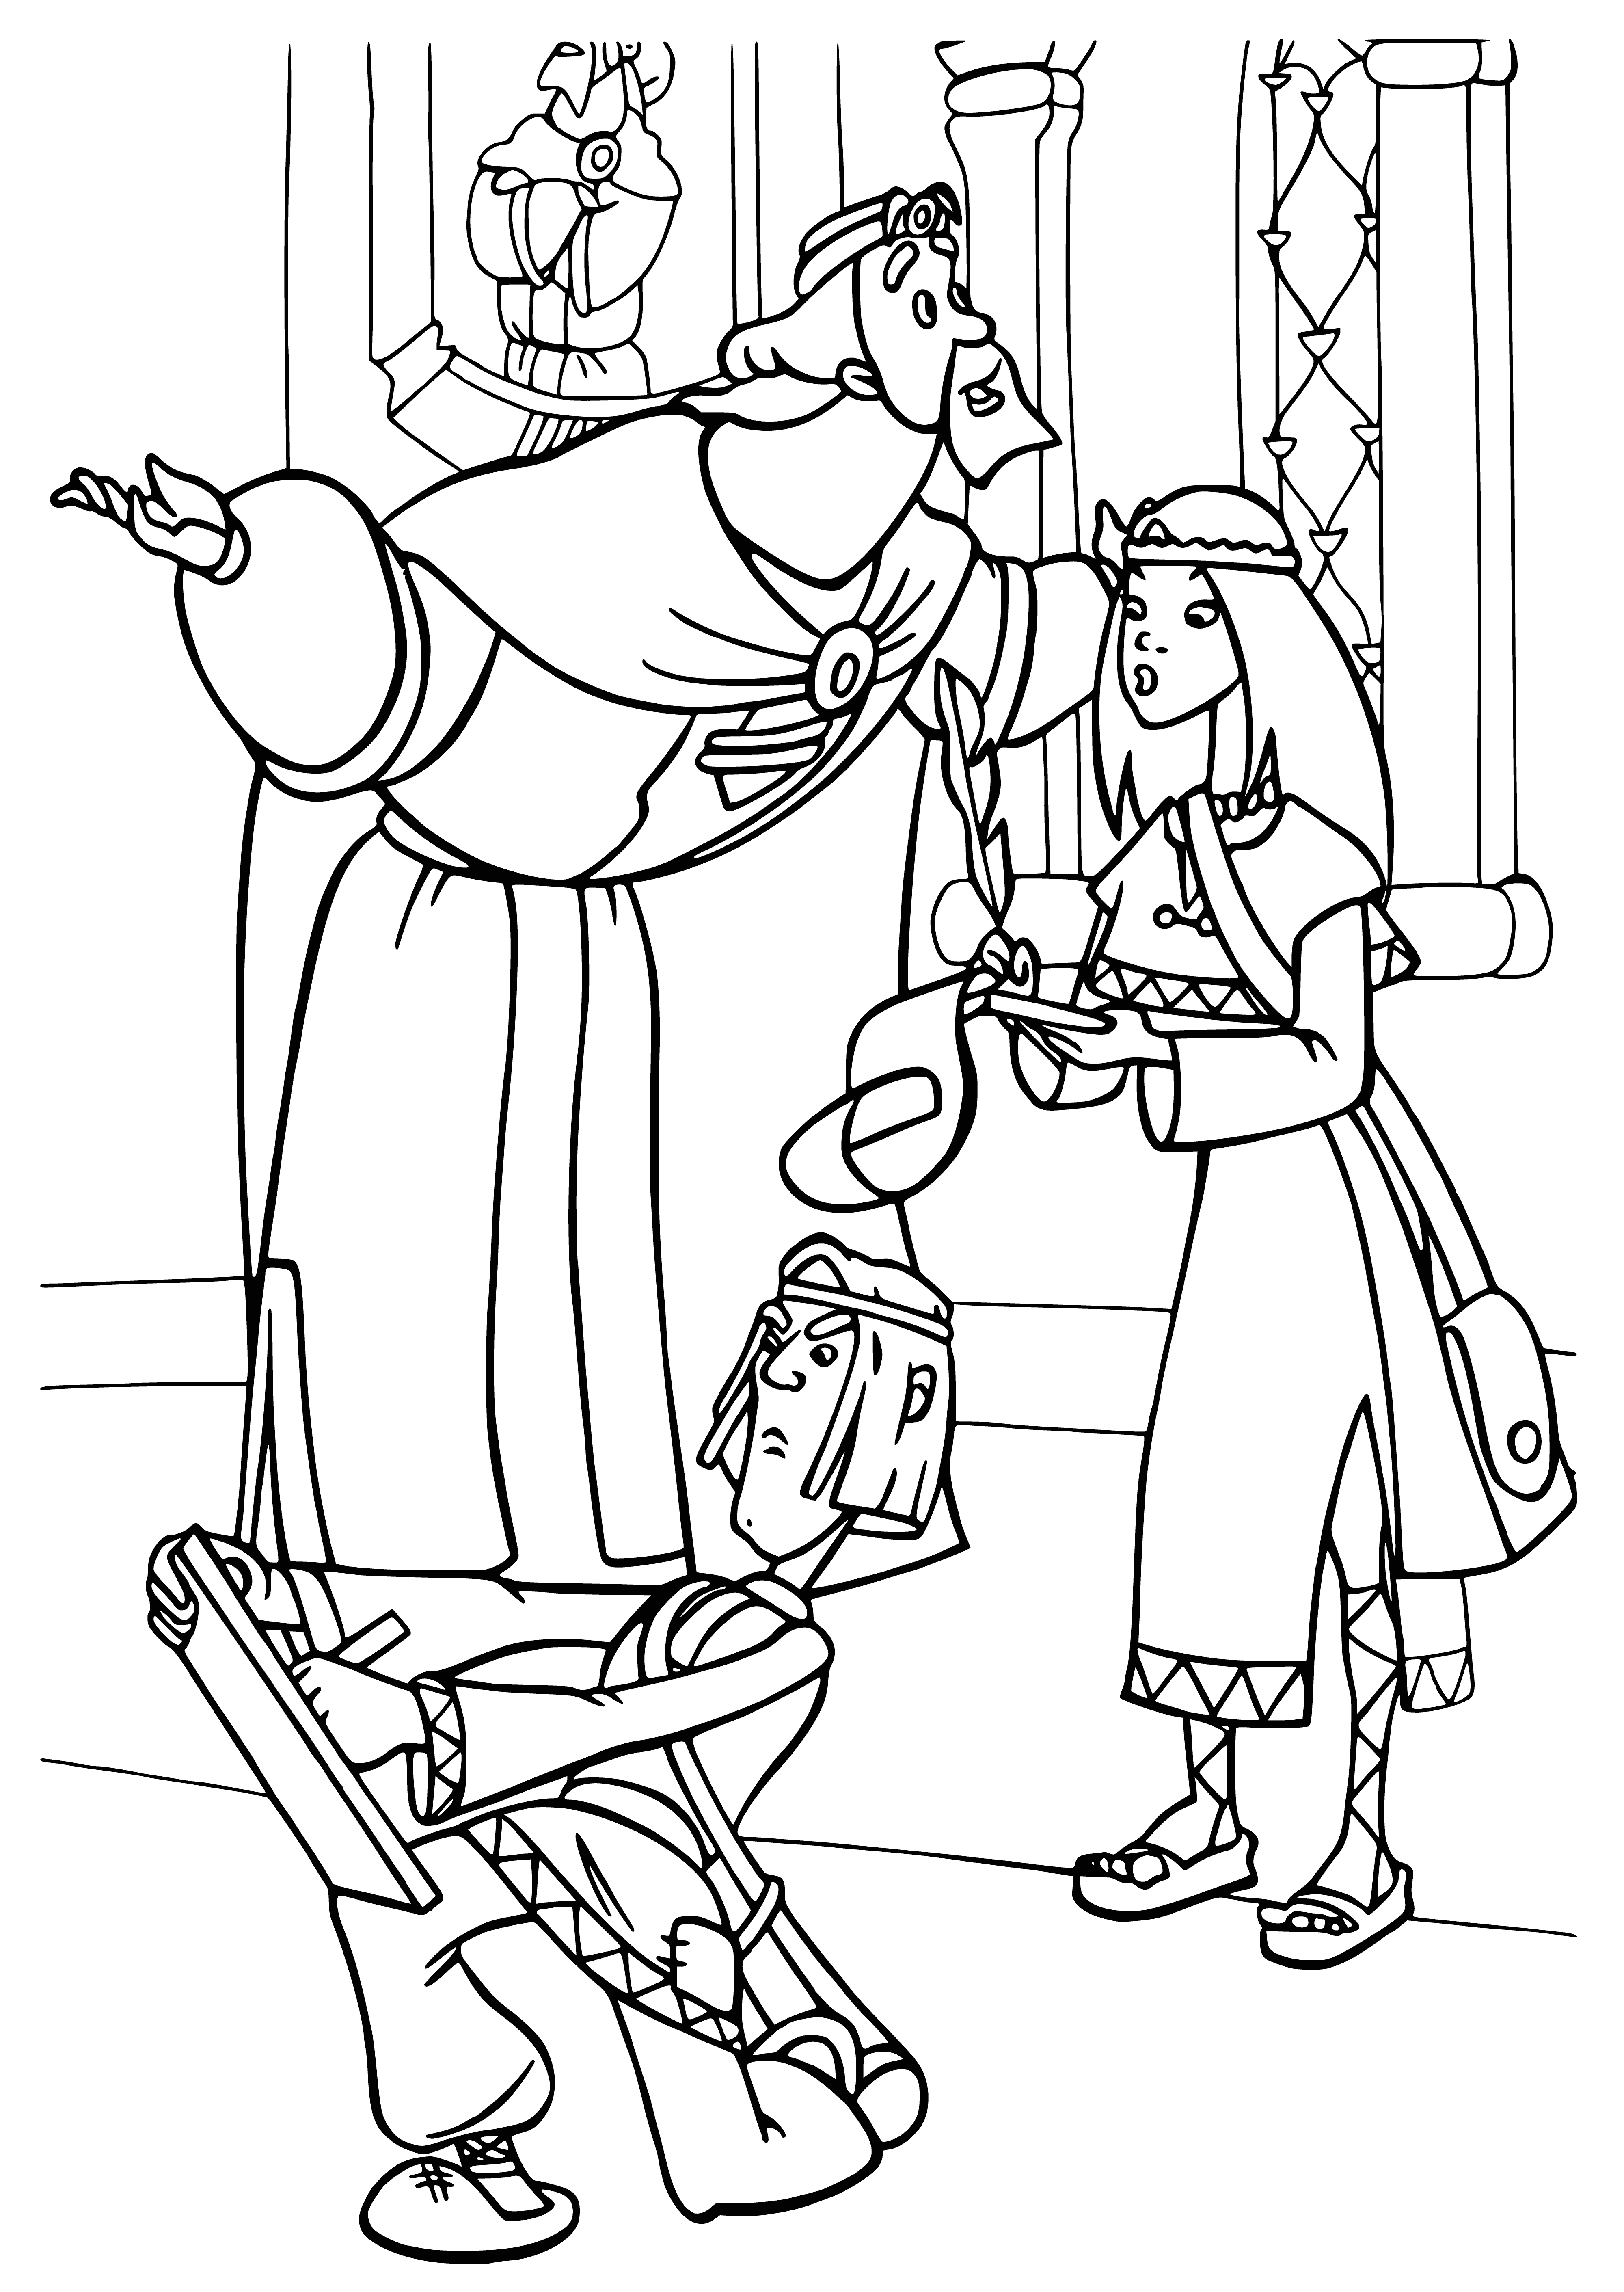 coloring page: Man in armor & woman in dress stand before mountain. He holds a sword; a bird perches on her shoulder.